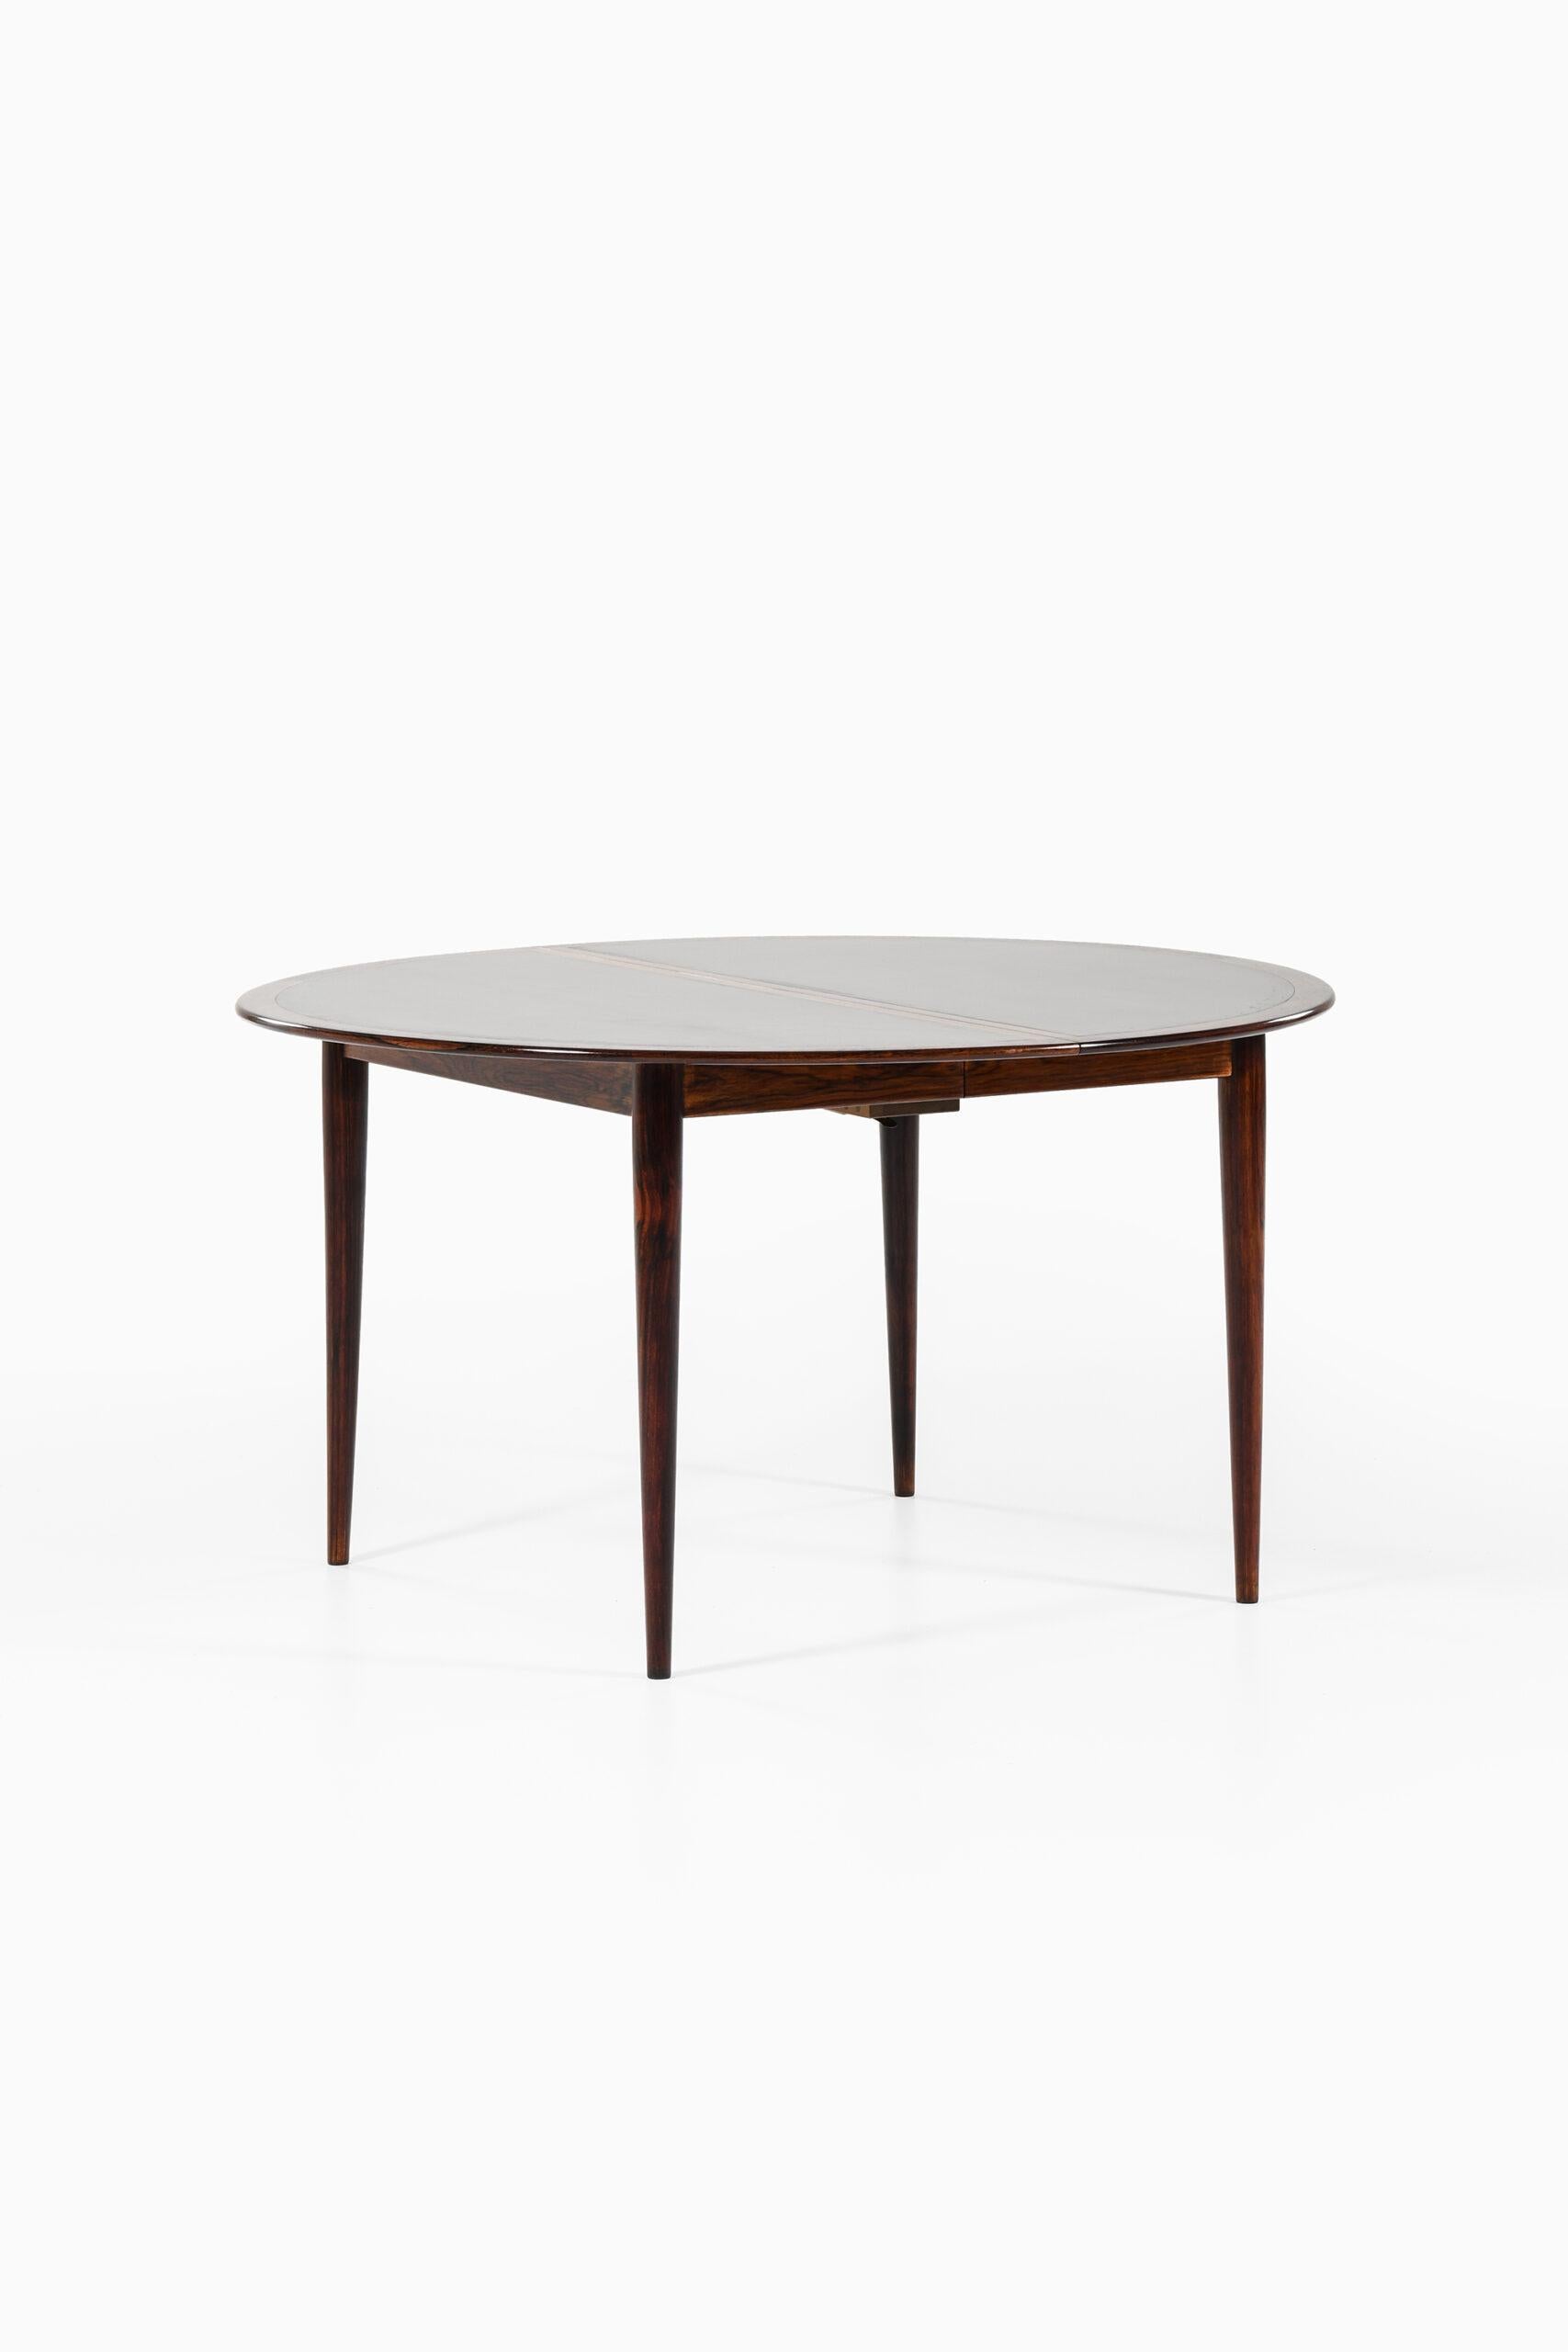 Very rare dining table designed by Grete Jalk. Produced by P. Jeppesens Møbelfabrik in Denmark. 
Dimensions (W x D x H): 136 ( 245 ) x 136 x 72 cm.